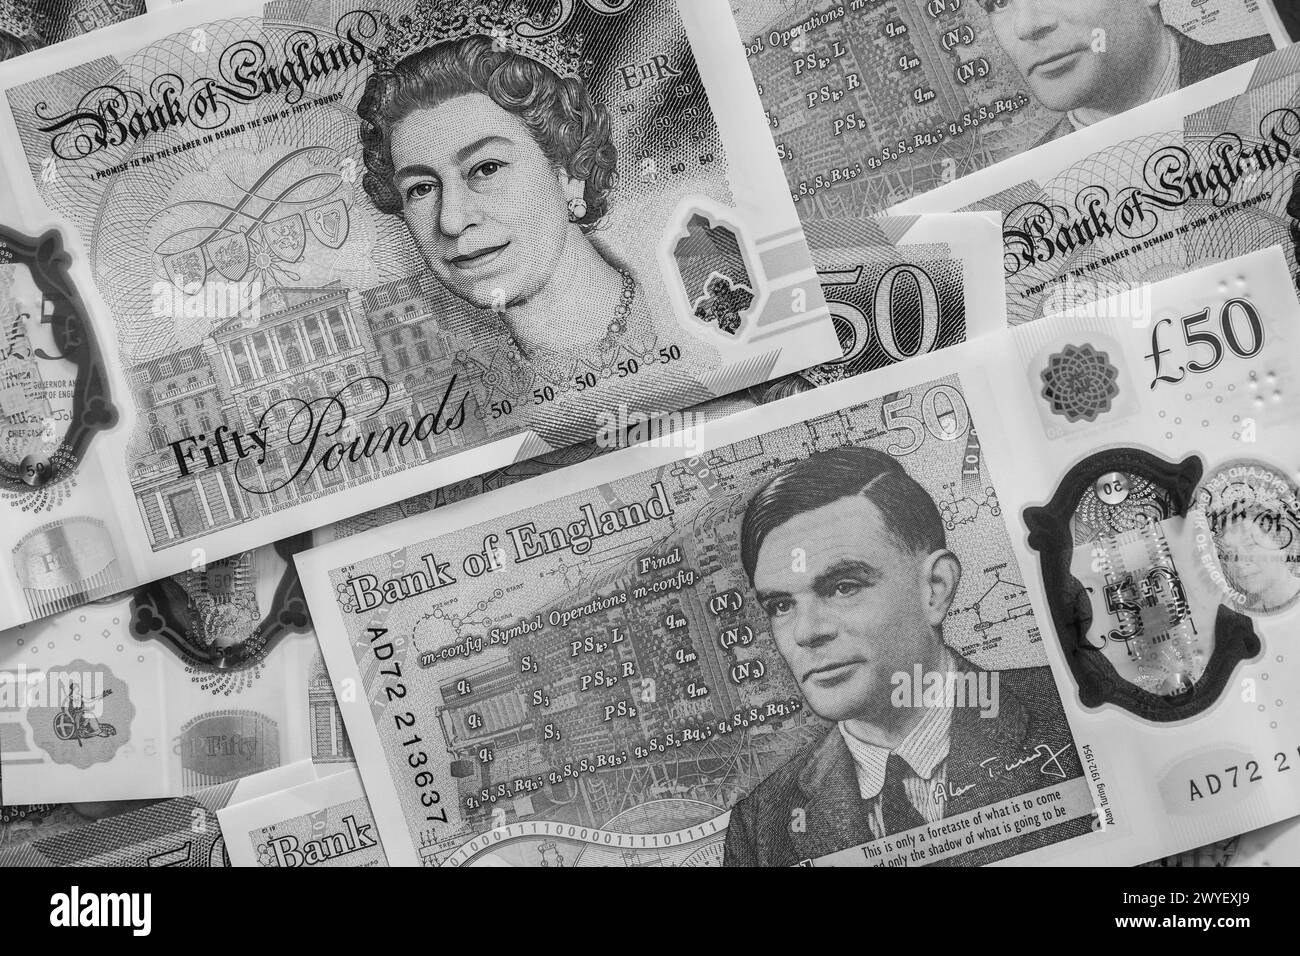 The new Bank of England £50 polymer banknote featuring World War II codebreaker Alan Turing. Stock Photo